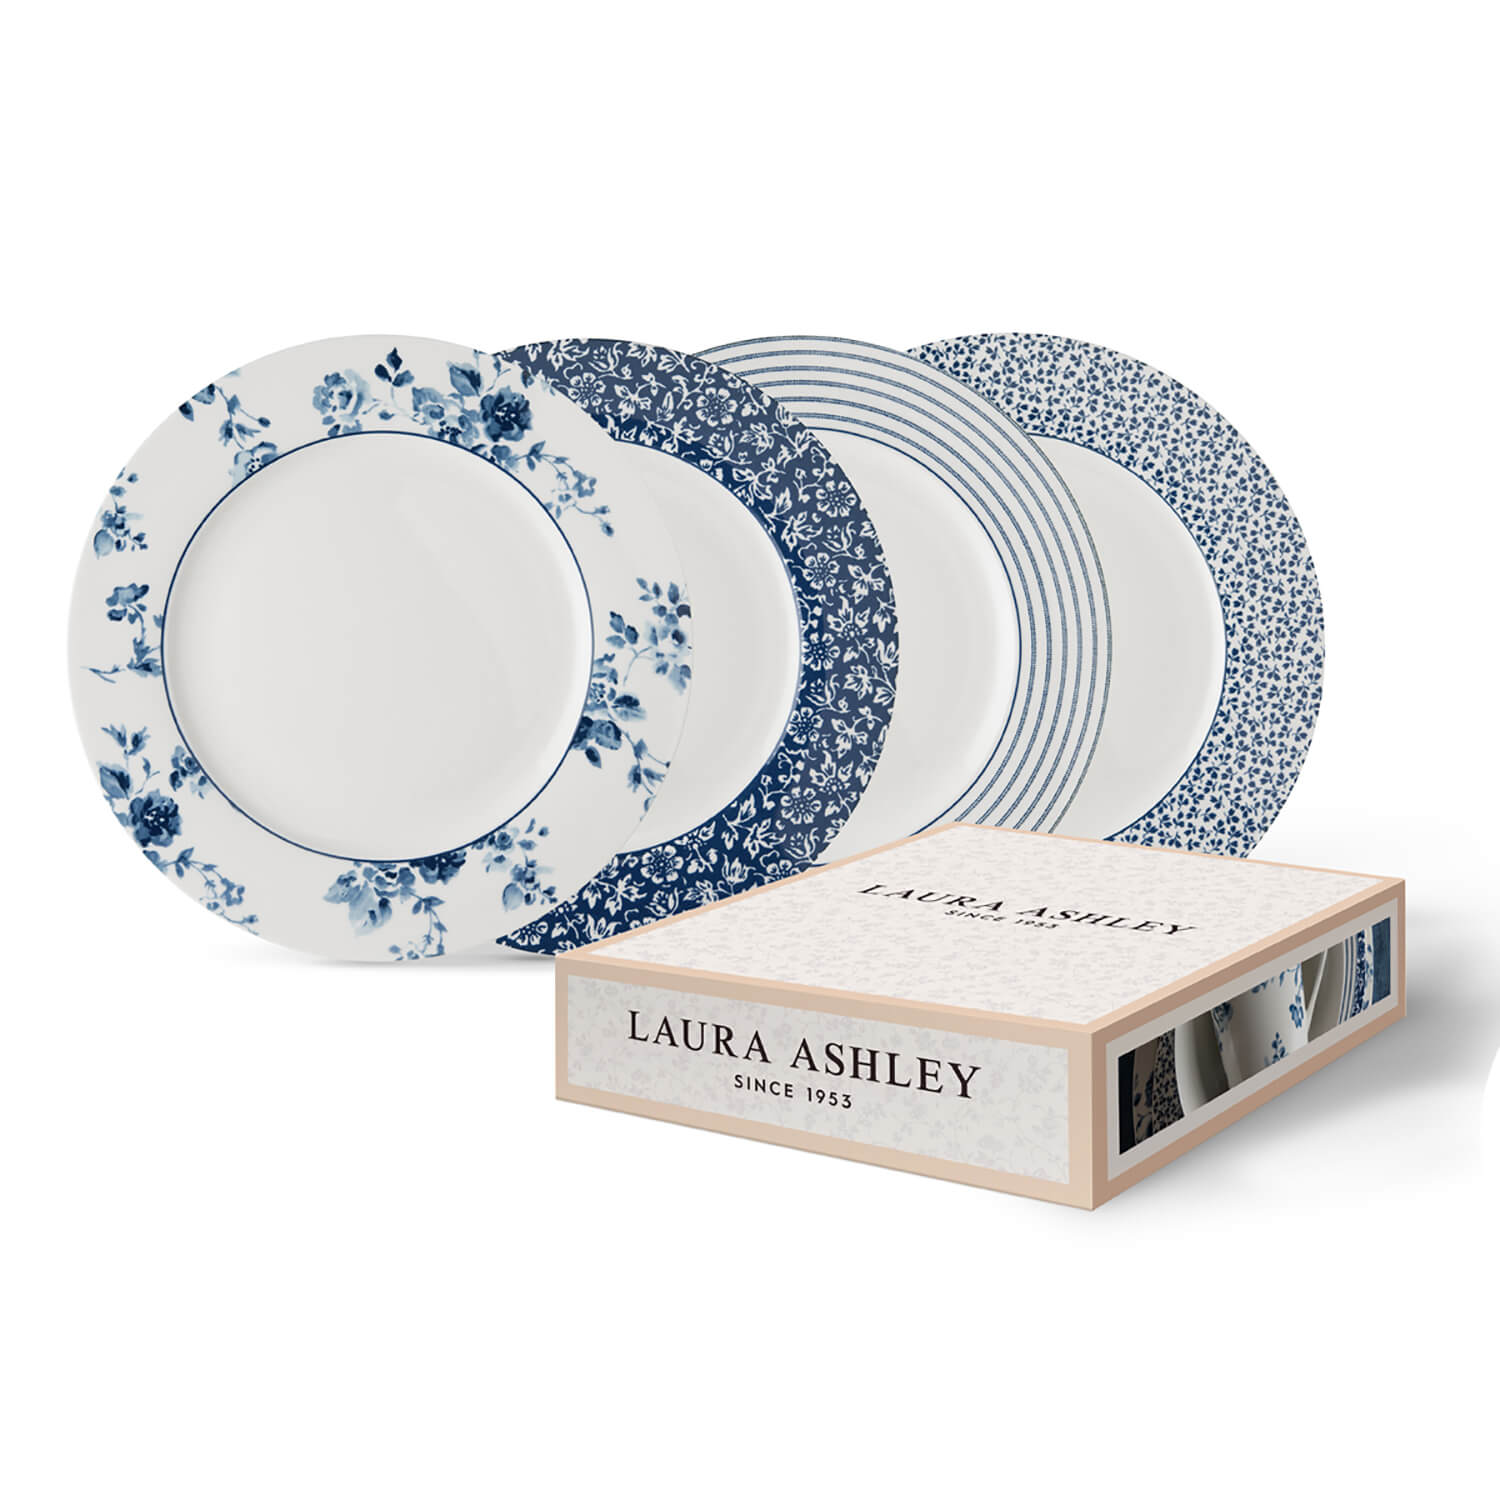 Laura Ashley Blueprint Collectables Set of 4 Plates 1 Shaws Department Stores